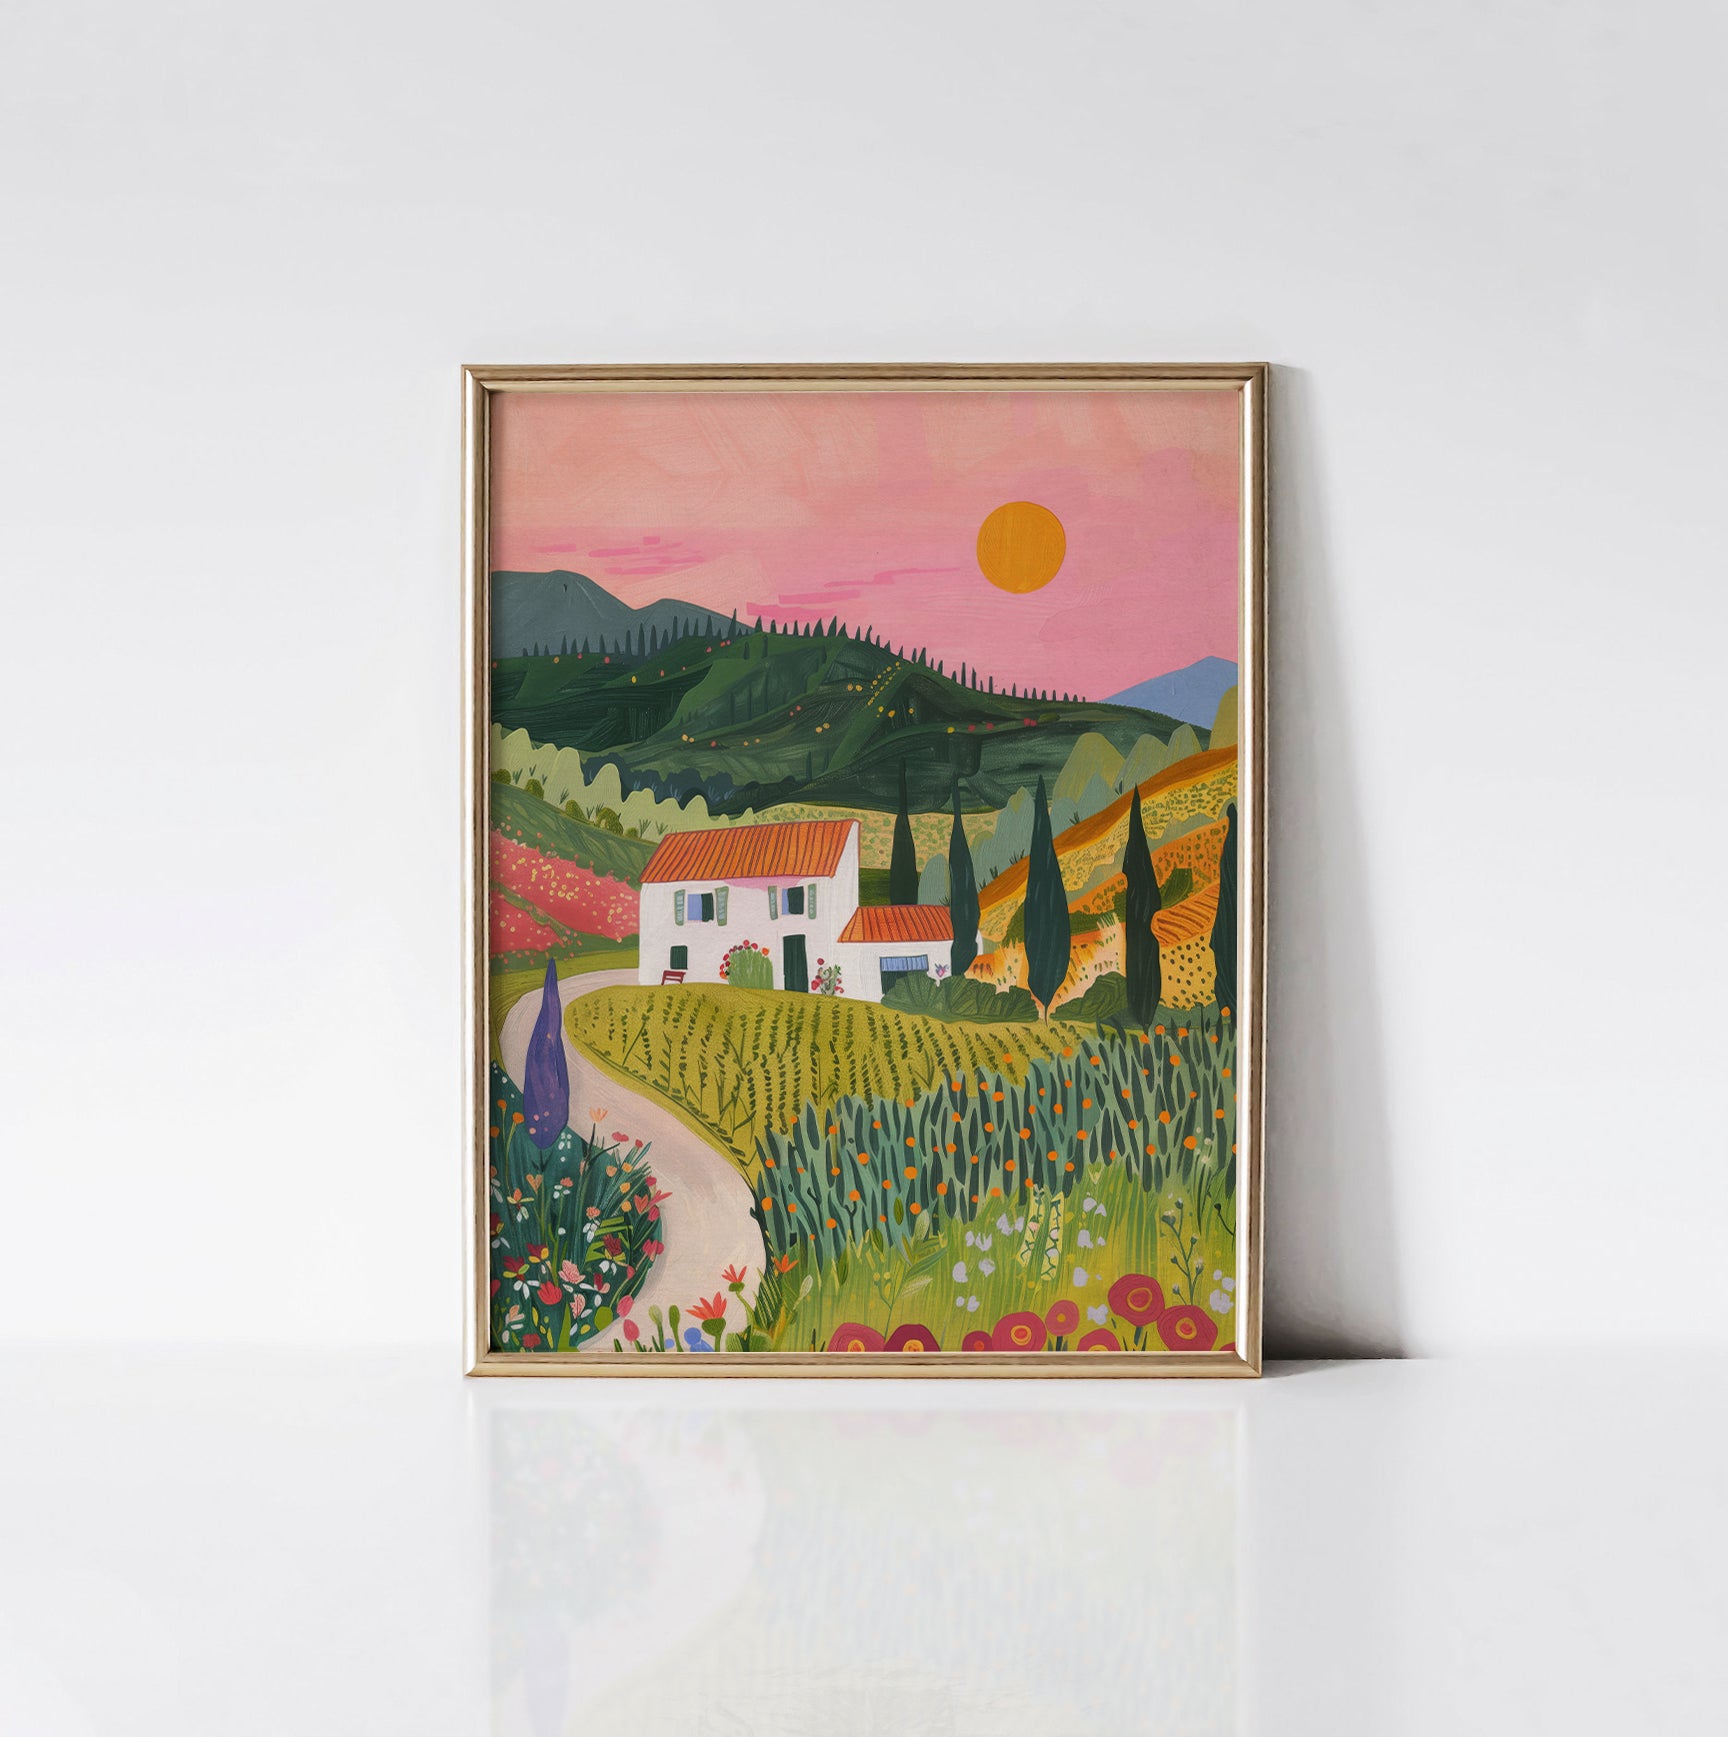 The 'Sunny Countryside Retreat' art print displayed in a sleek gold frame, showcasing a white cottage amidst green fields and blooming flowers with a pink sunset in the background.